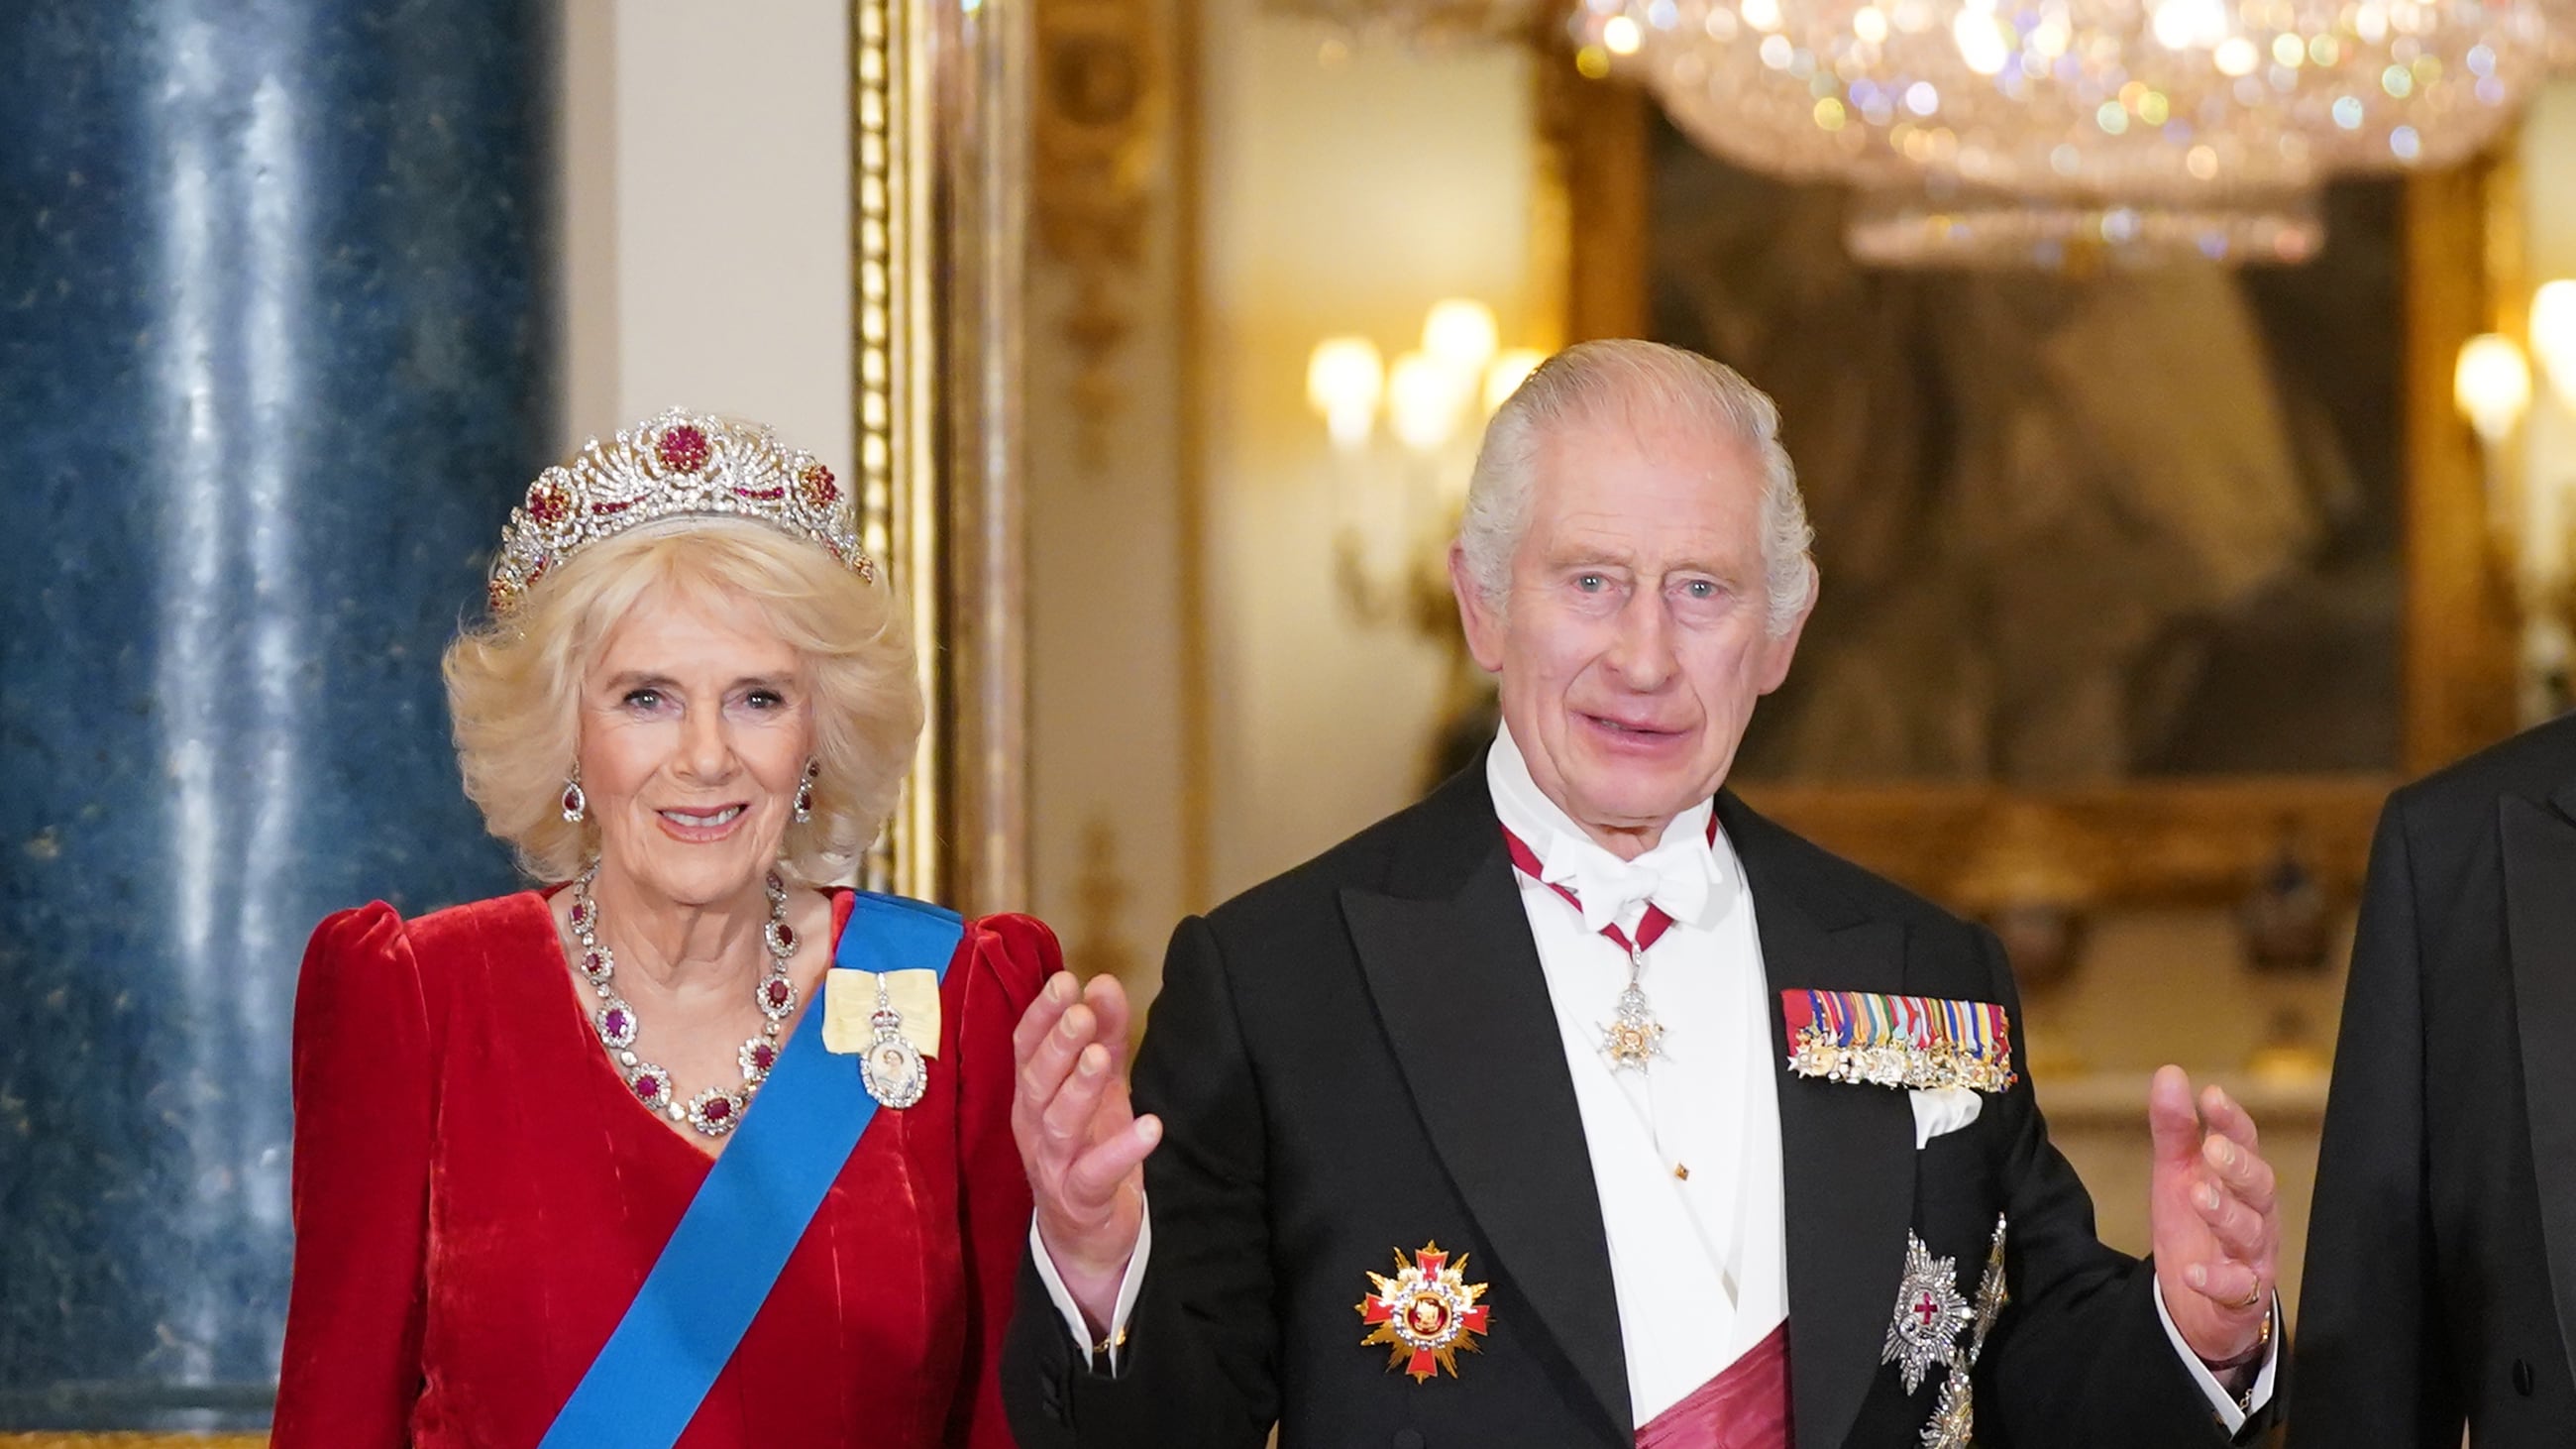 The Queen and King ahead of the state banquet at Buckingham Palace